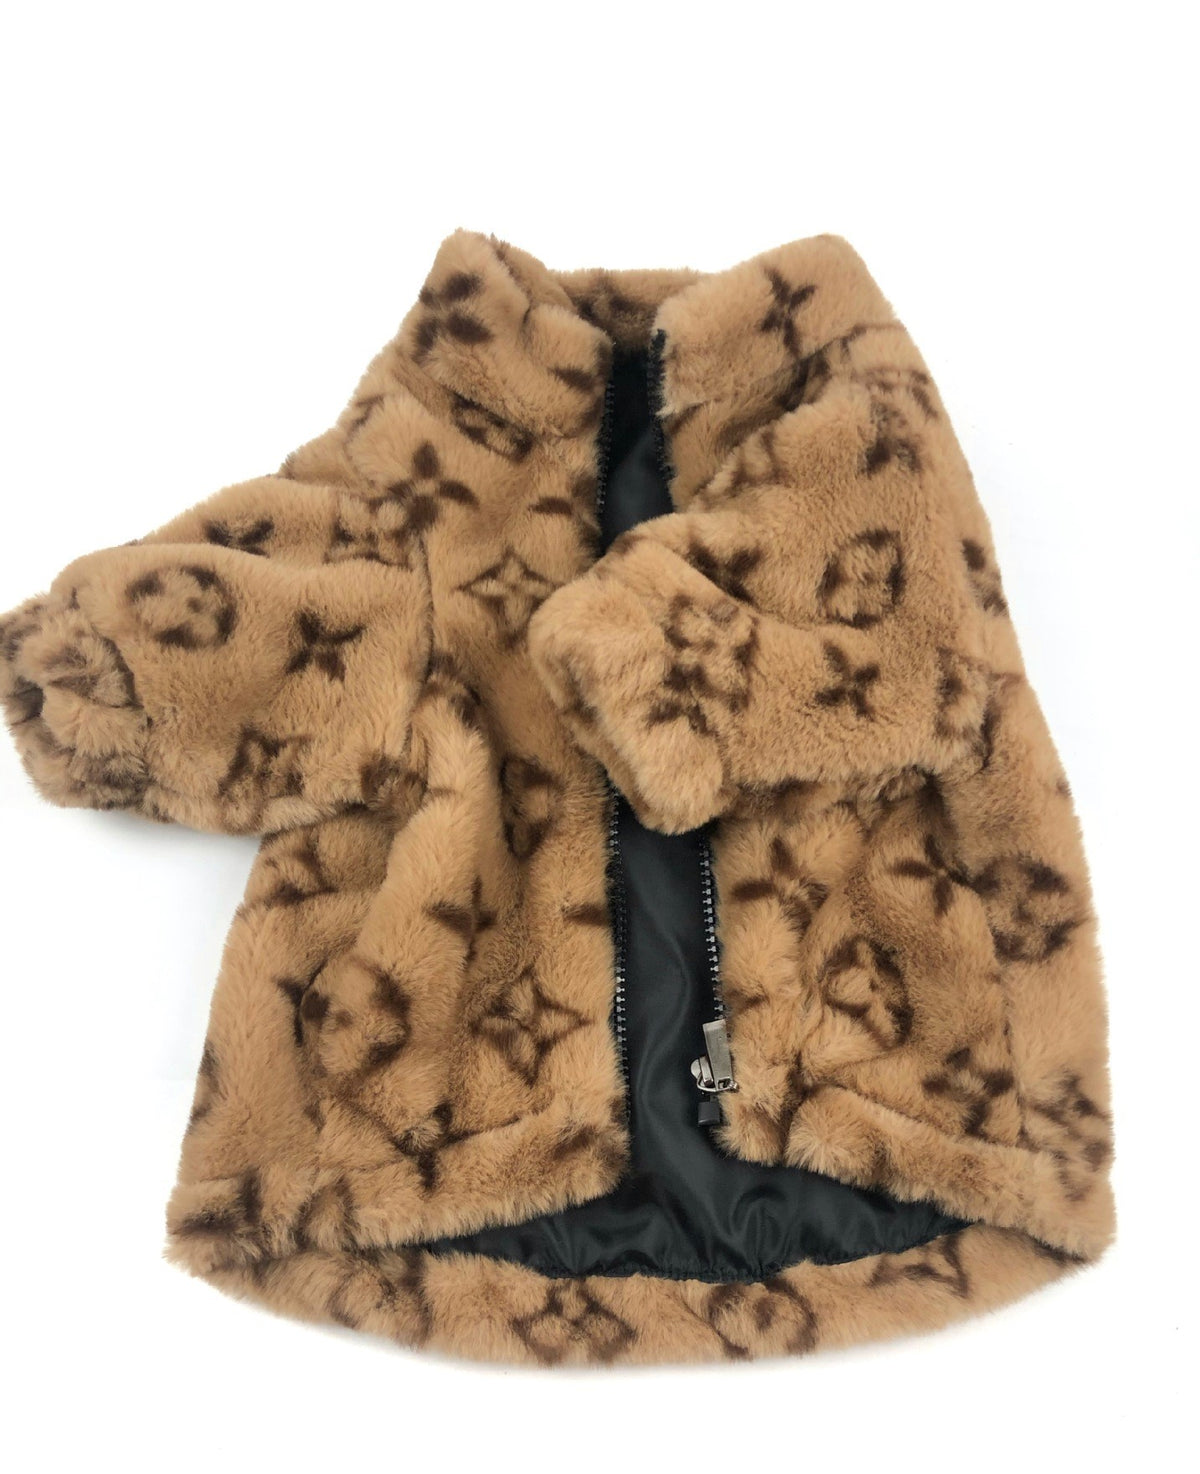 Chewy Bear French Bulldog Jacket - XS / Brown - Frenchie Complex Shop